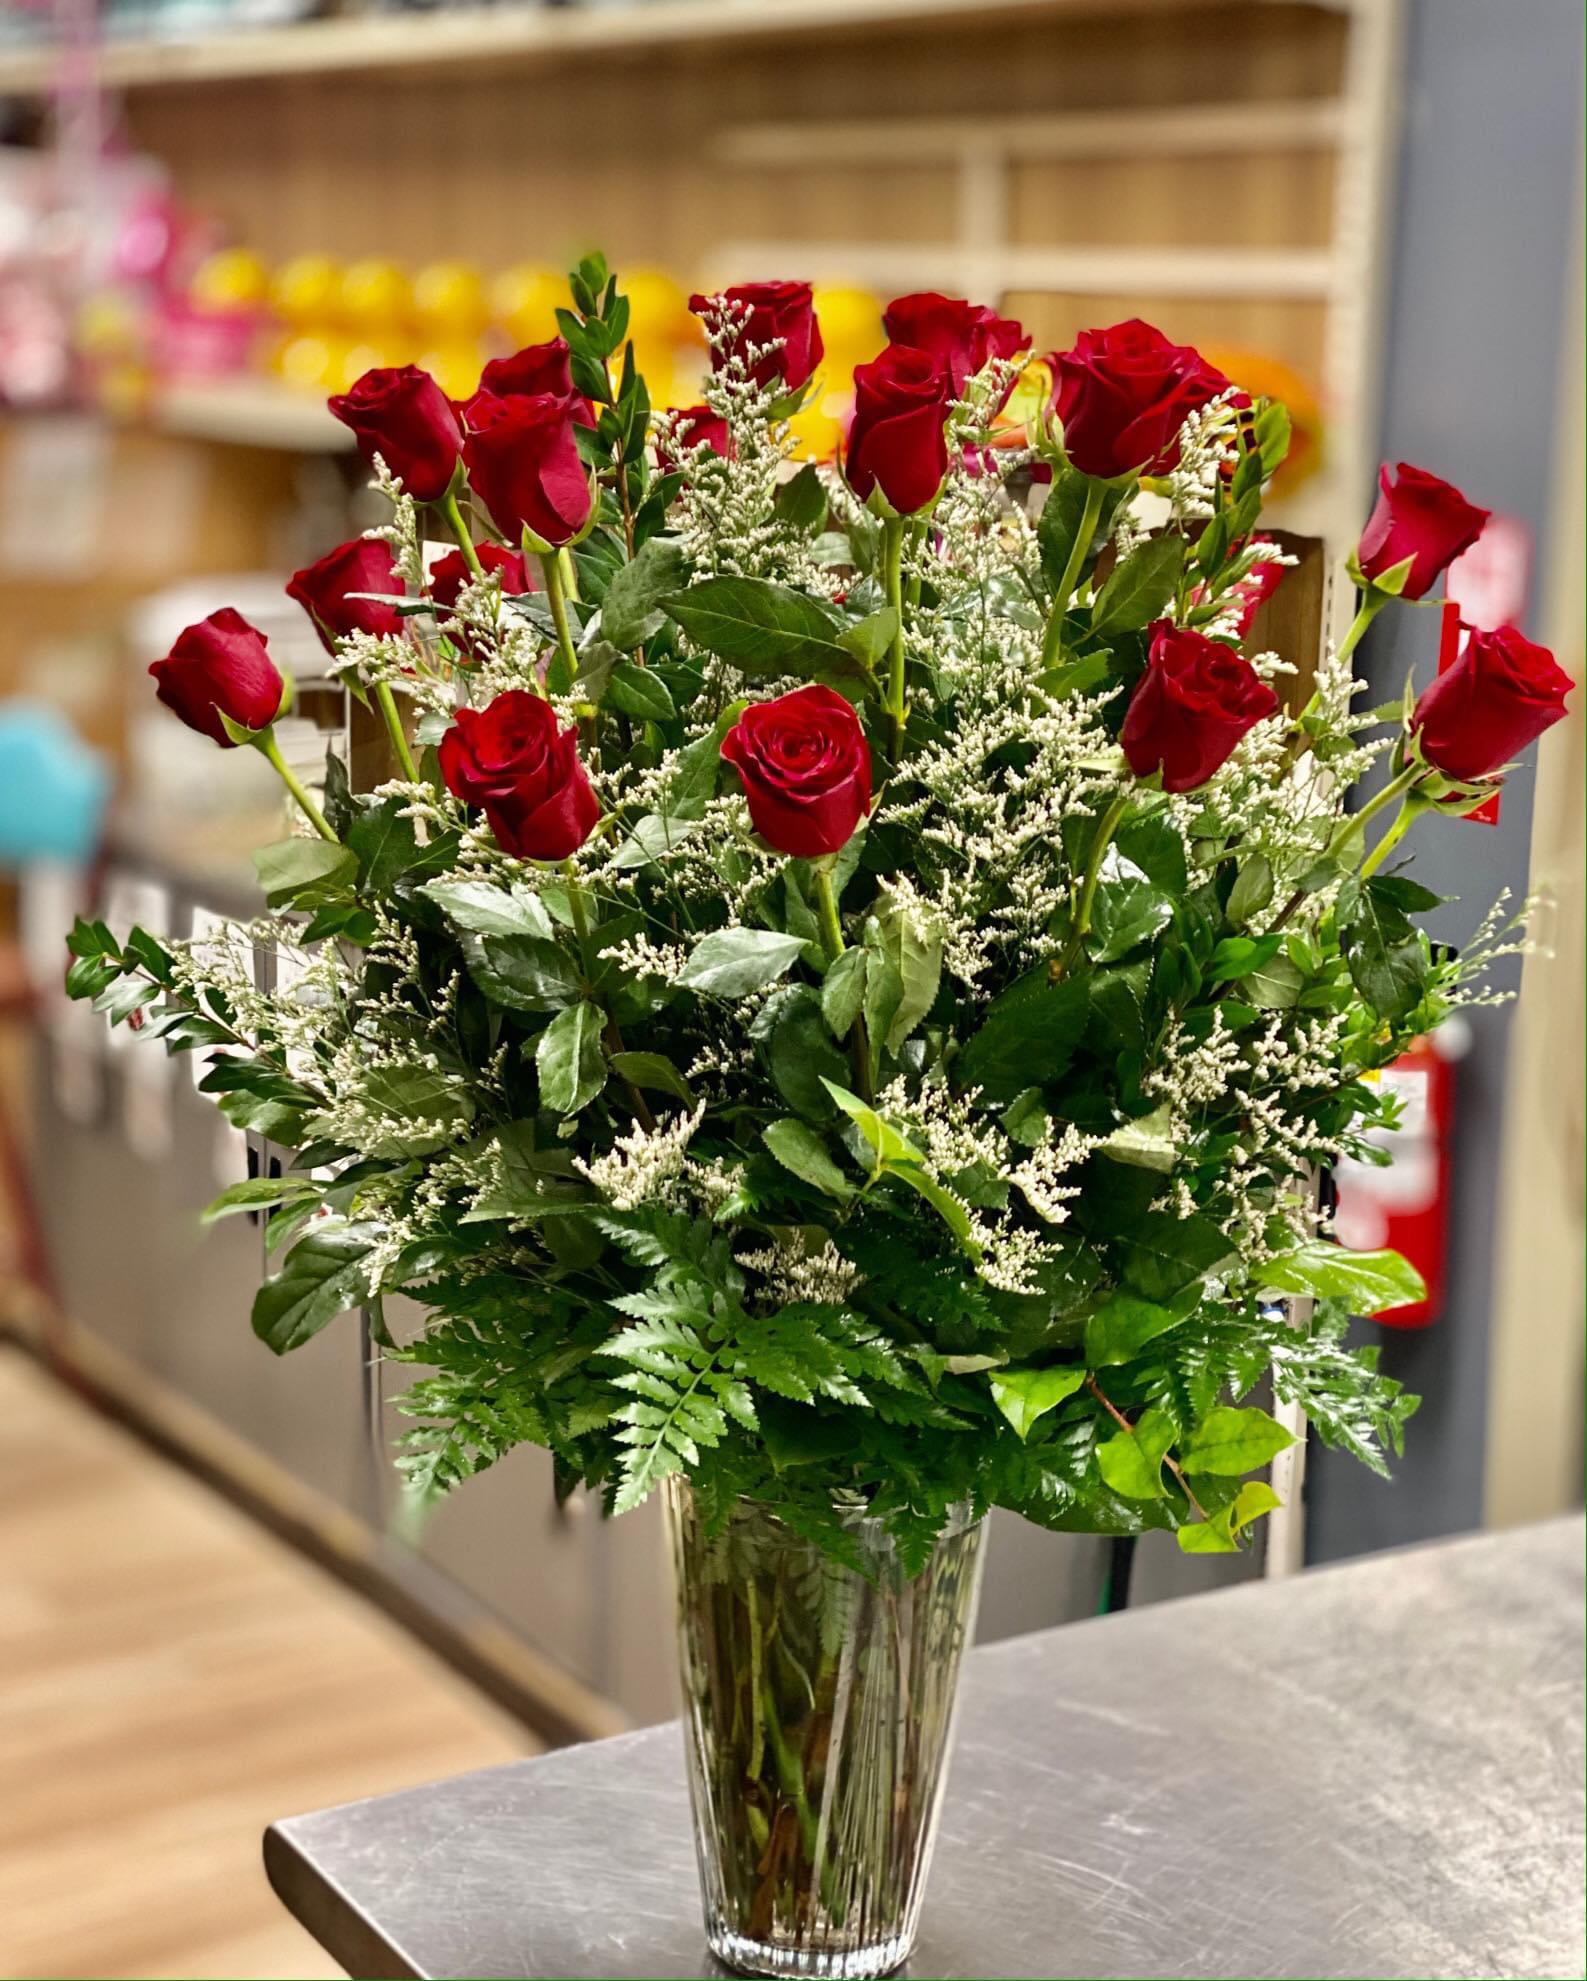 2 DZ Red Roses in a Vase accented with White Limonium